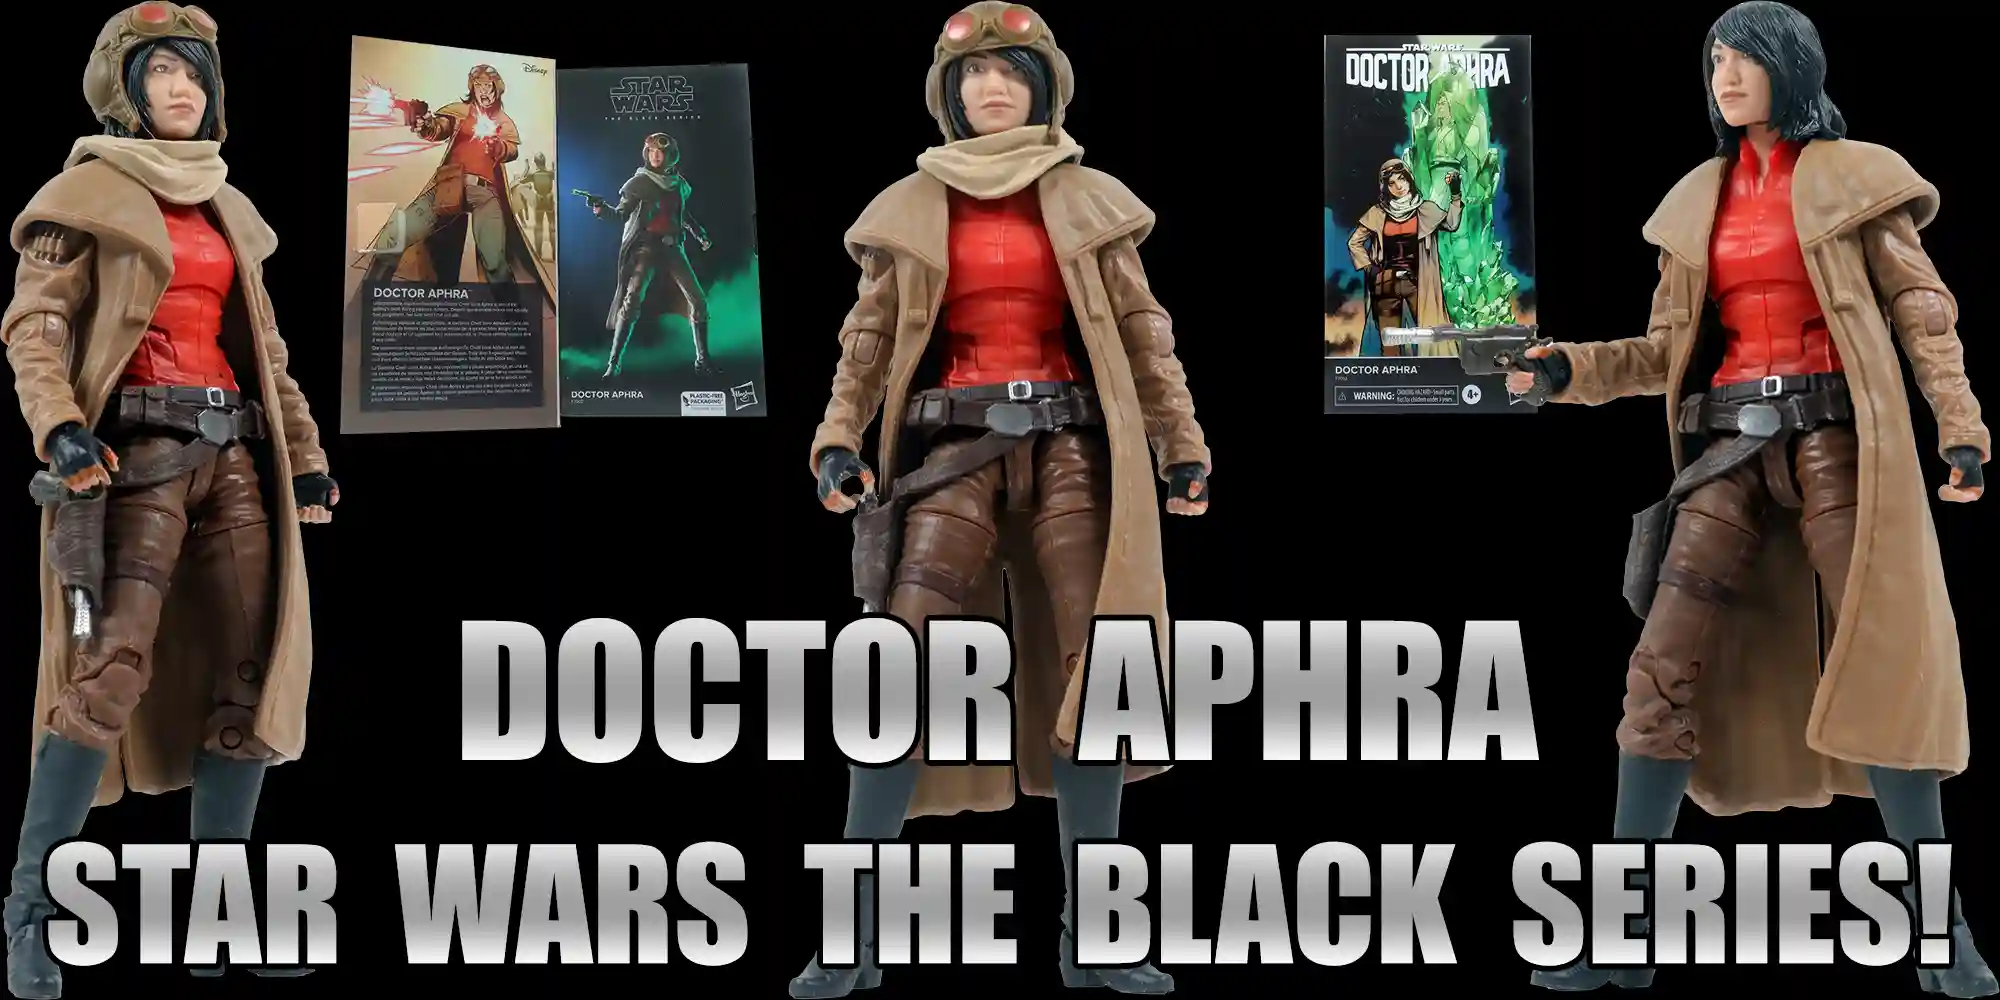 The Action-Packed Journey With Doctor Aphra Continues In The Black Series! Now In The Archives - Check It Out!